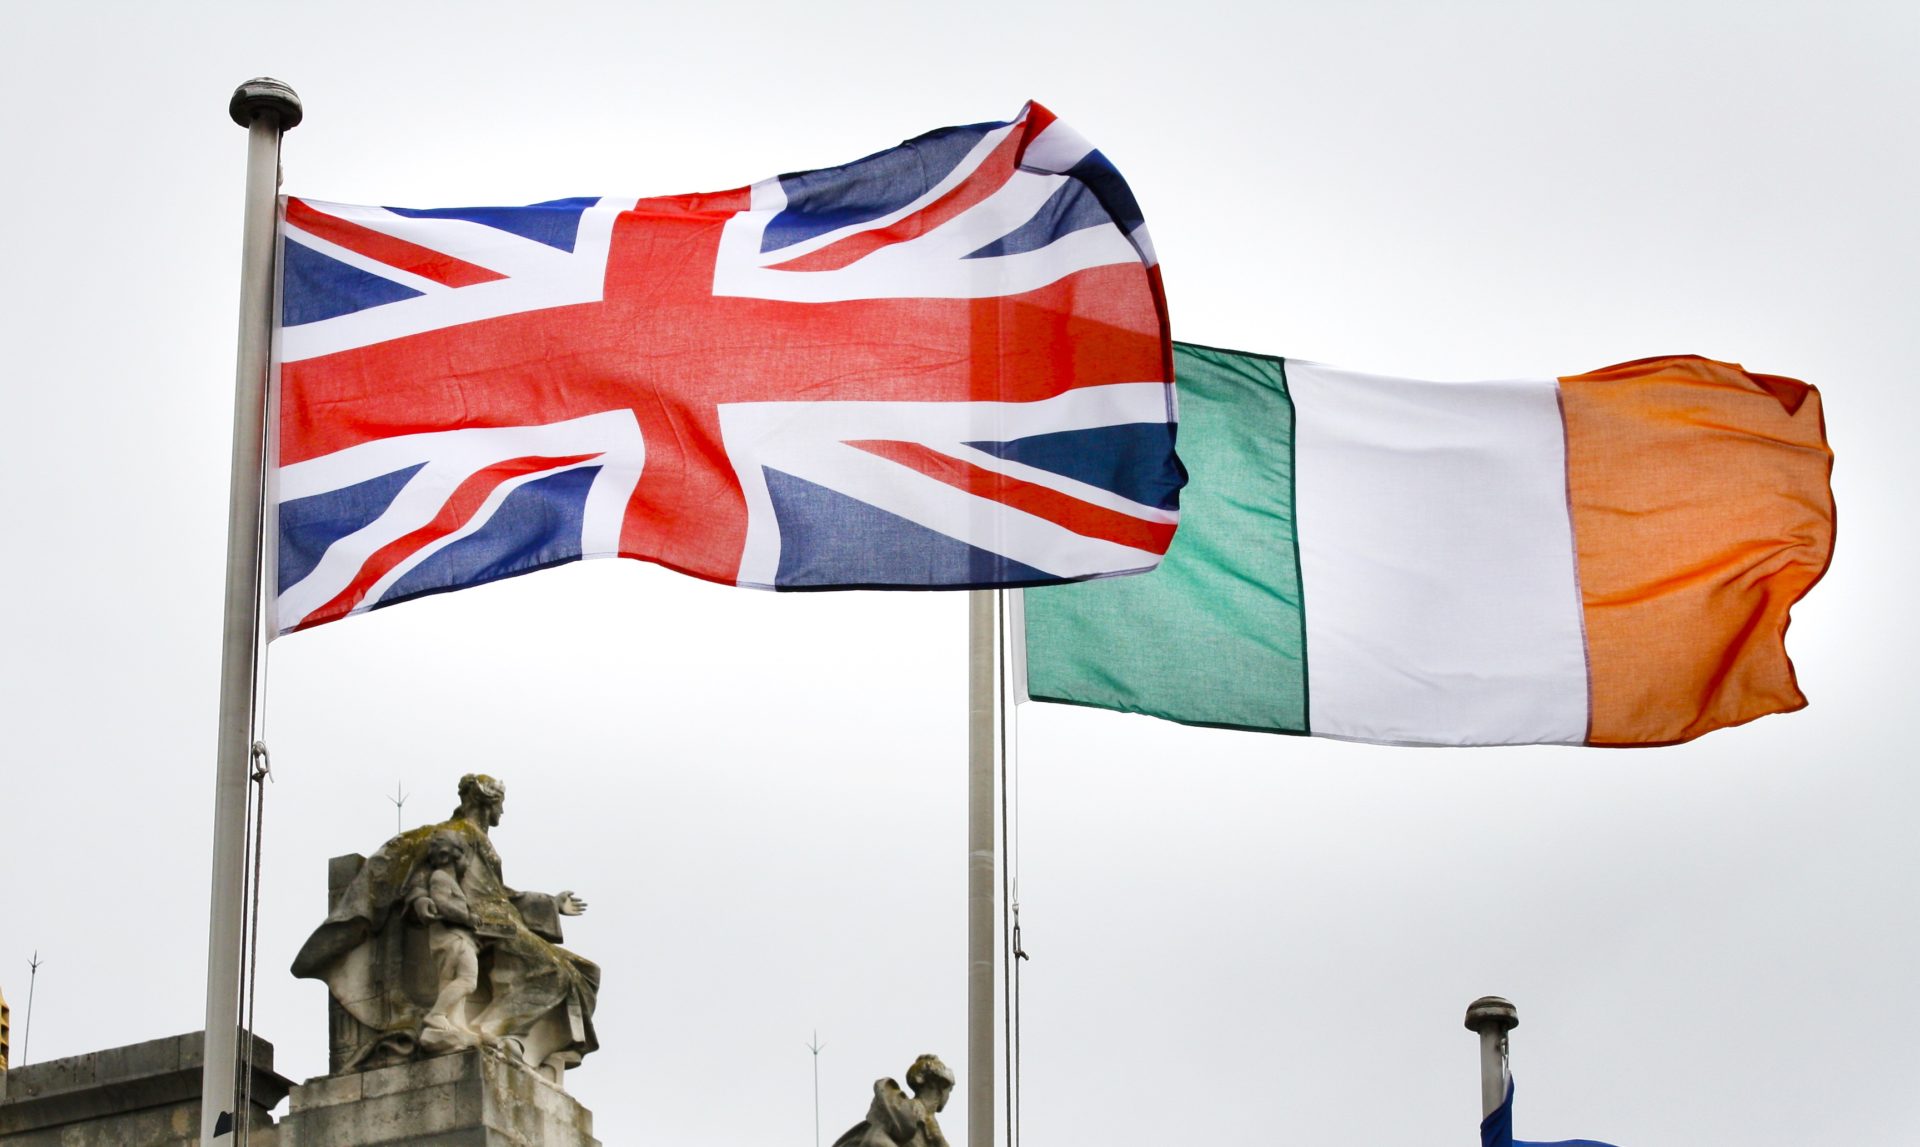 A British flag flies next to an Irish Tricolour at Government Buildings in Dublin during the State visit of Britain's Queen Elizabeth II to Ireland in May 2011